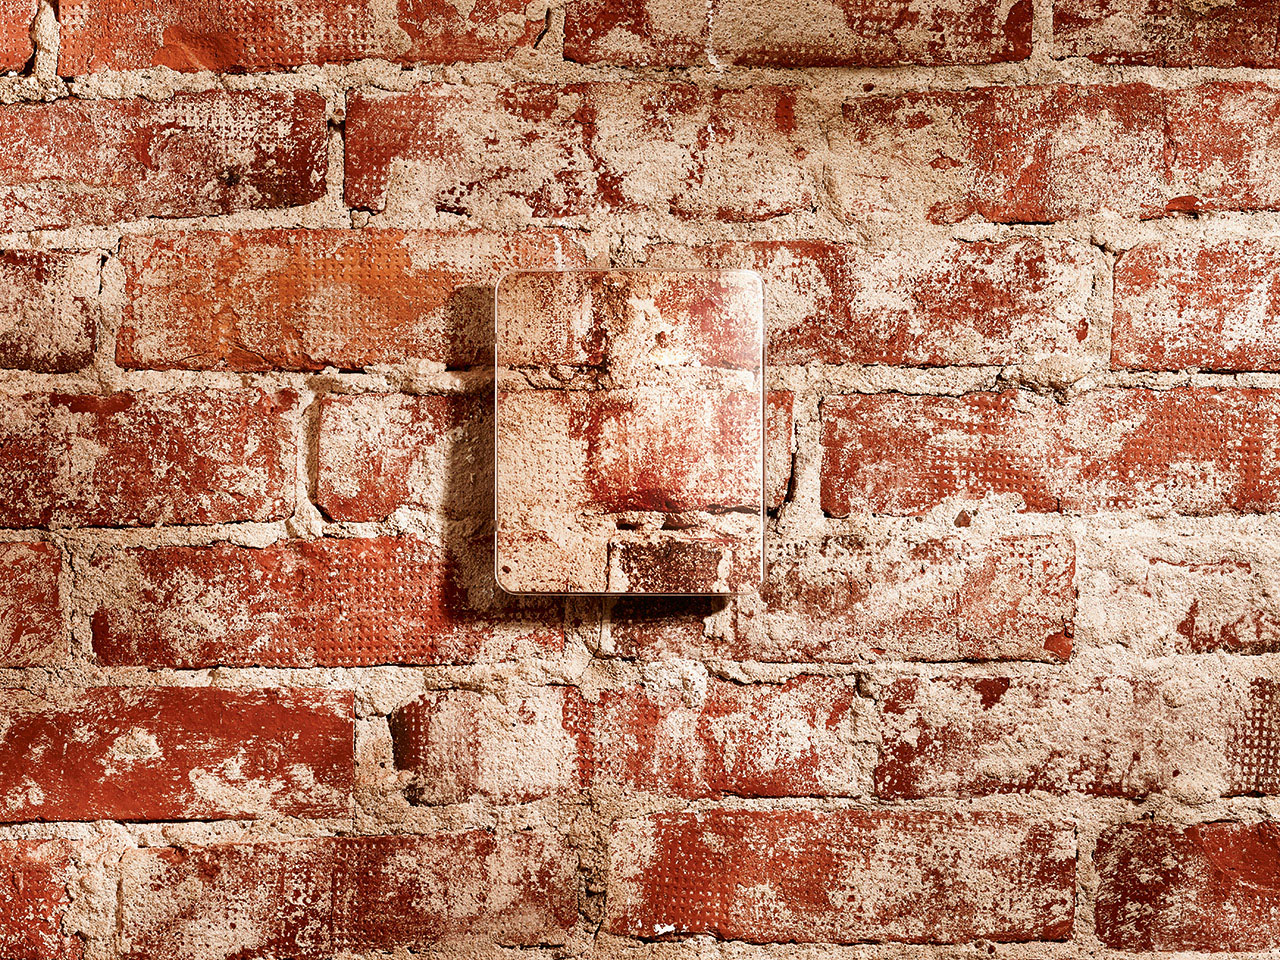 Example of a decorative cover for GMW90 and HMW90 on a brick wall